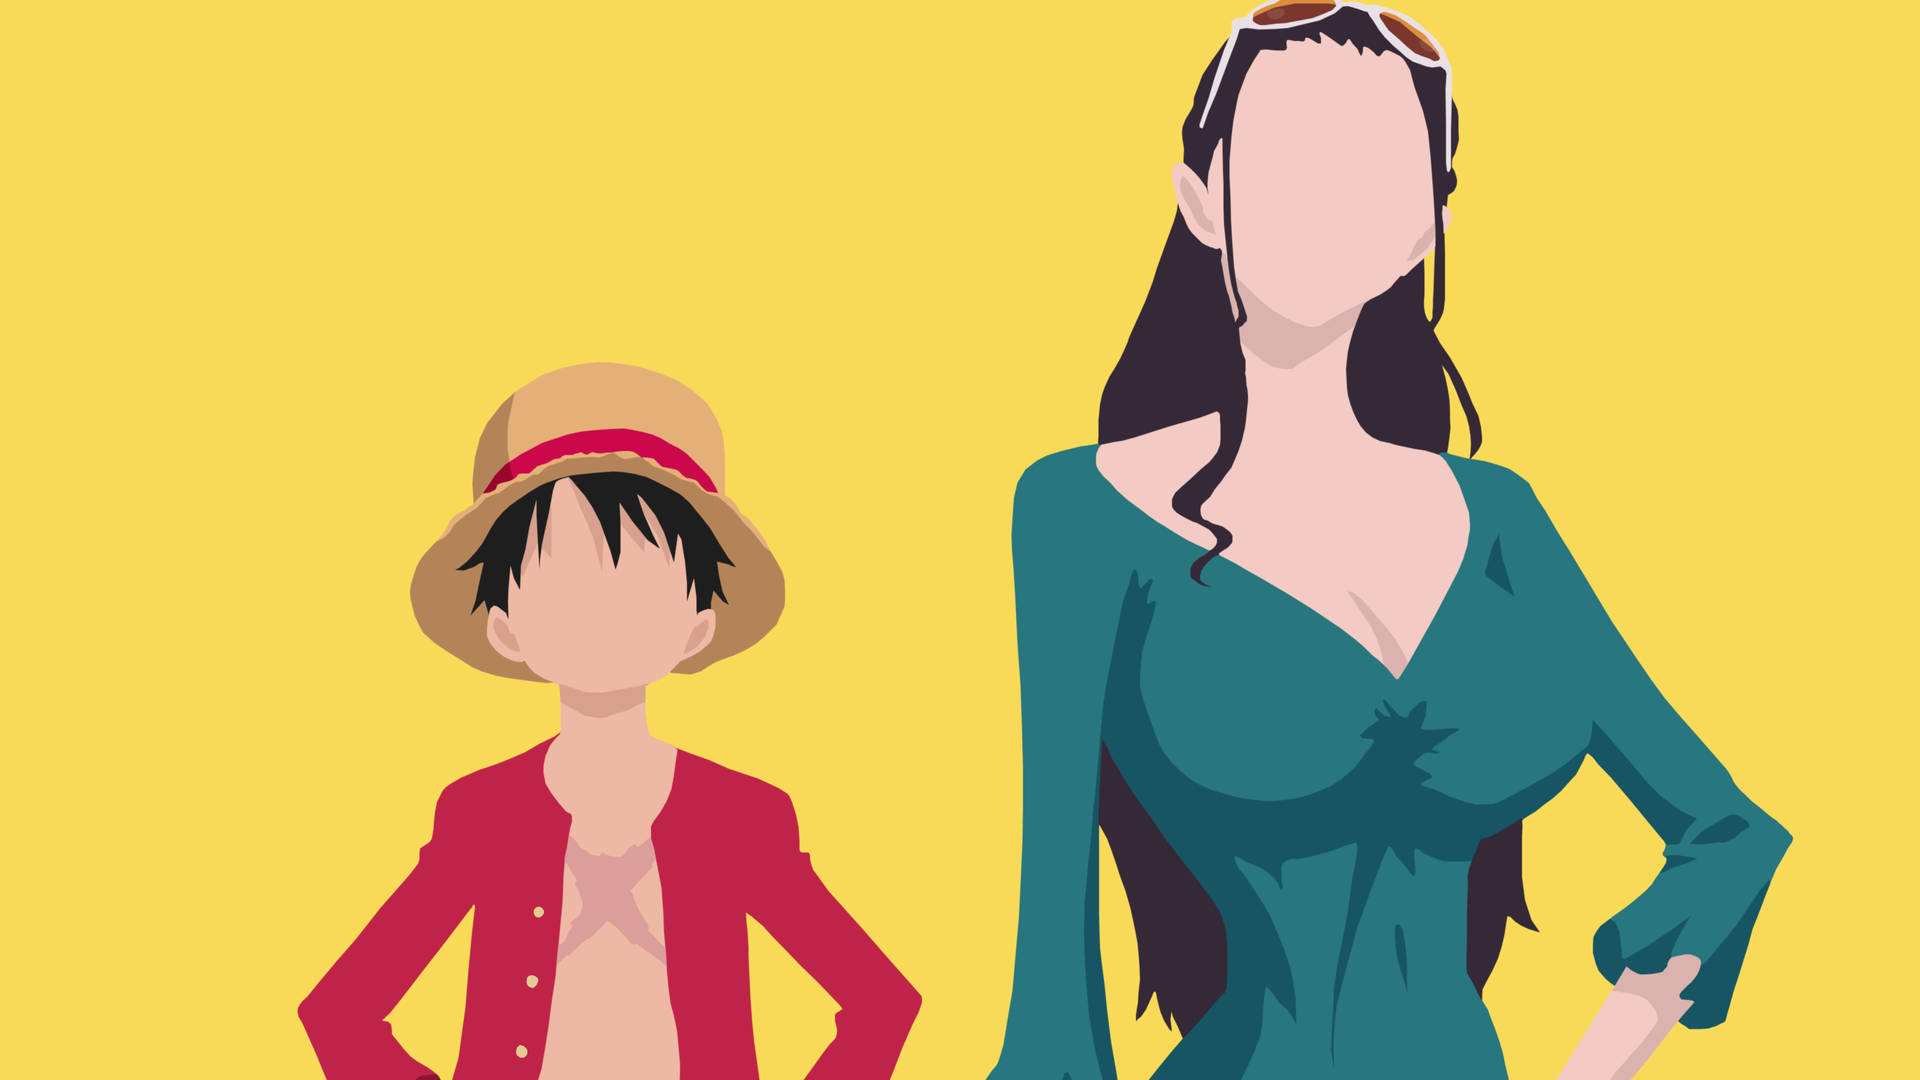 Download One Piece Pfp Nico Robin And Luffy Wallpaper 